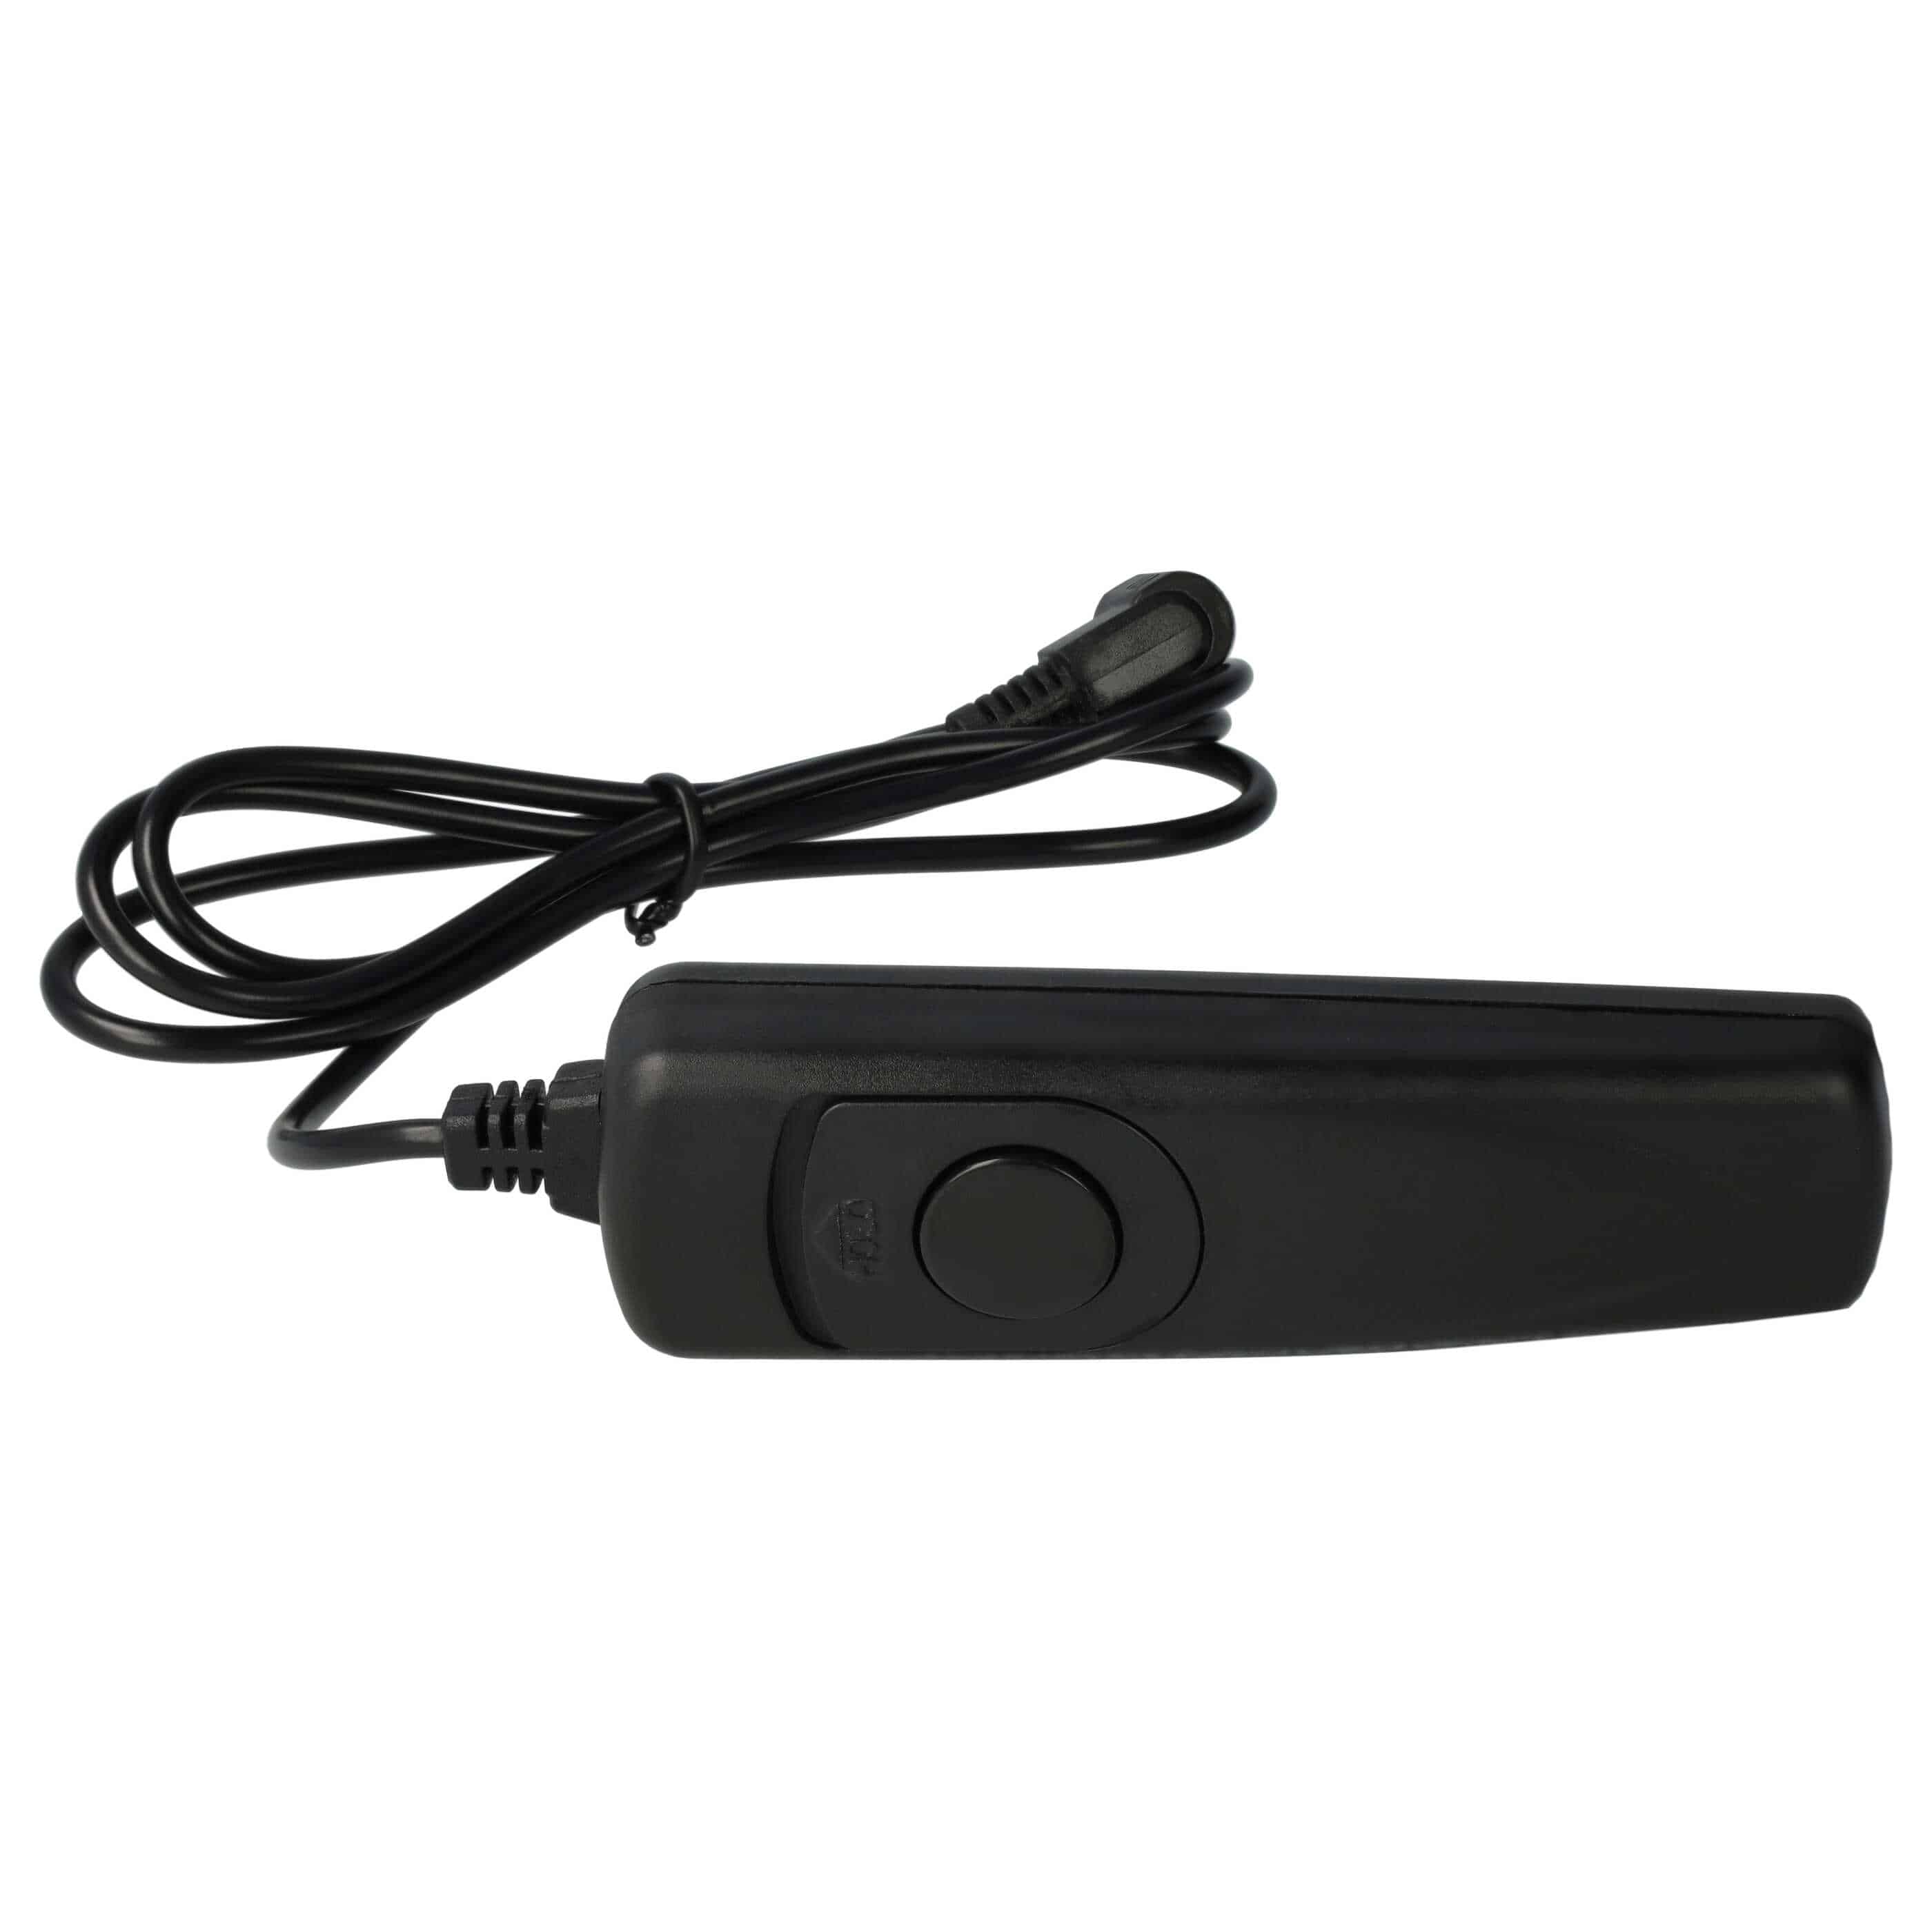 Remote Trigger as Exchange for Canon RS-60E3 for Camera etc. 2-Step Shutter, 1 m Lead